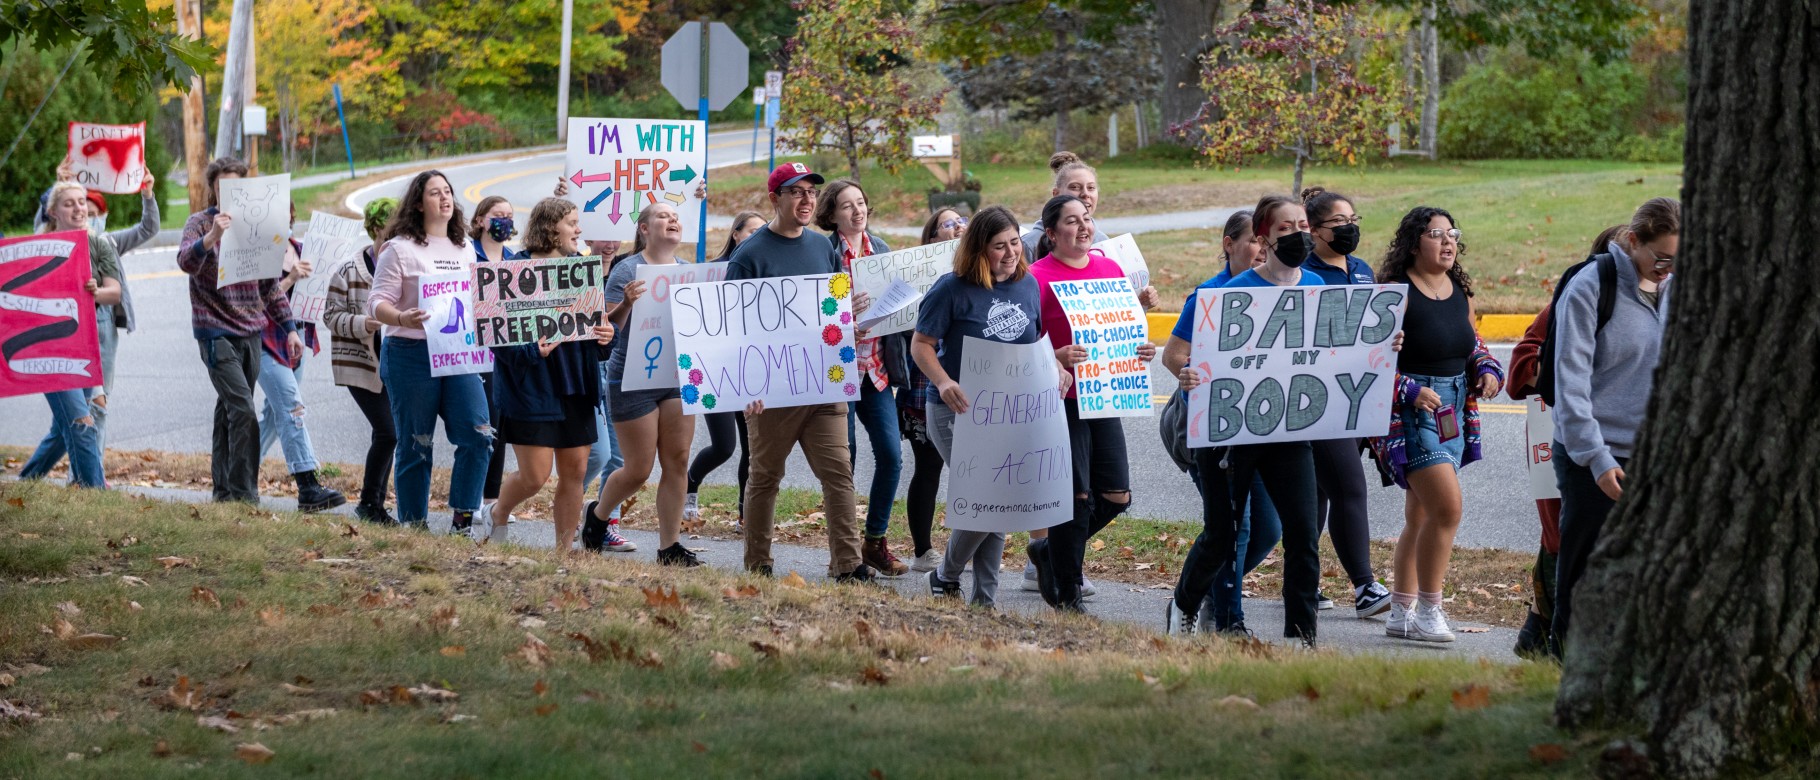 A group of students march through campus